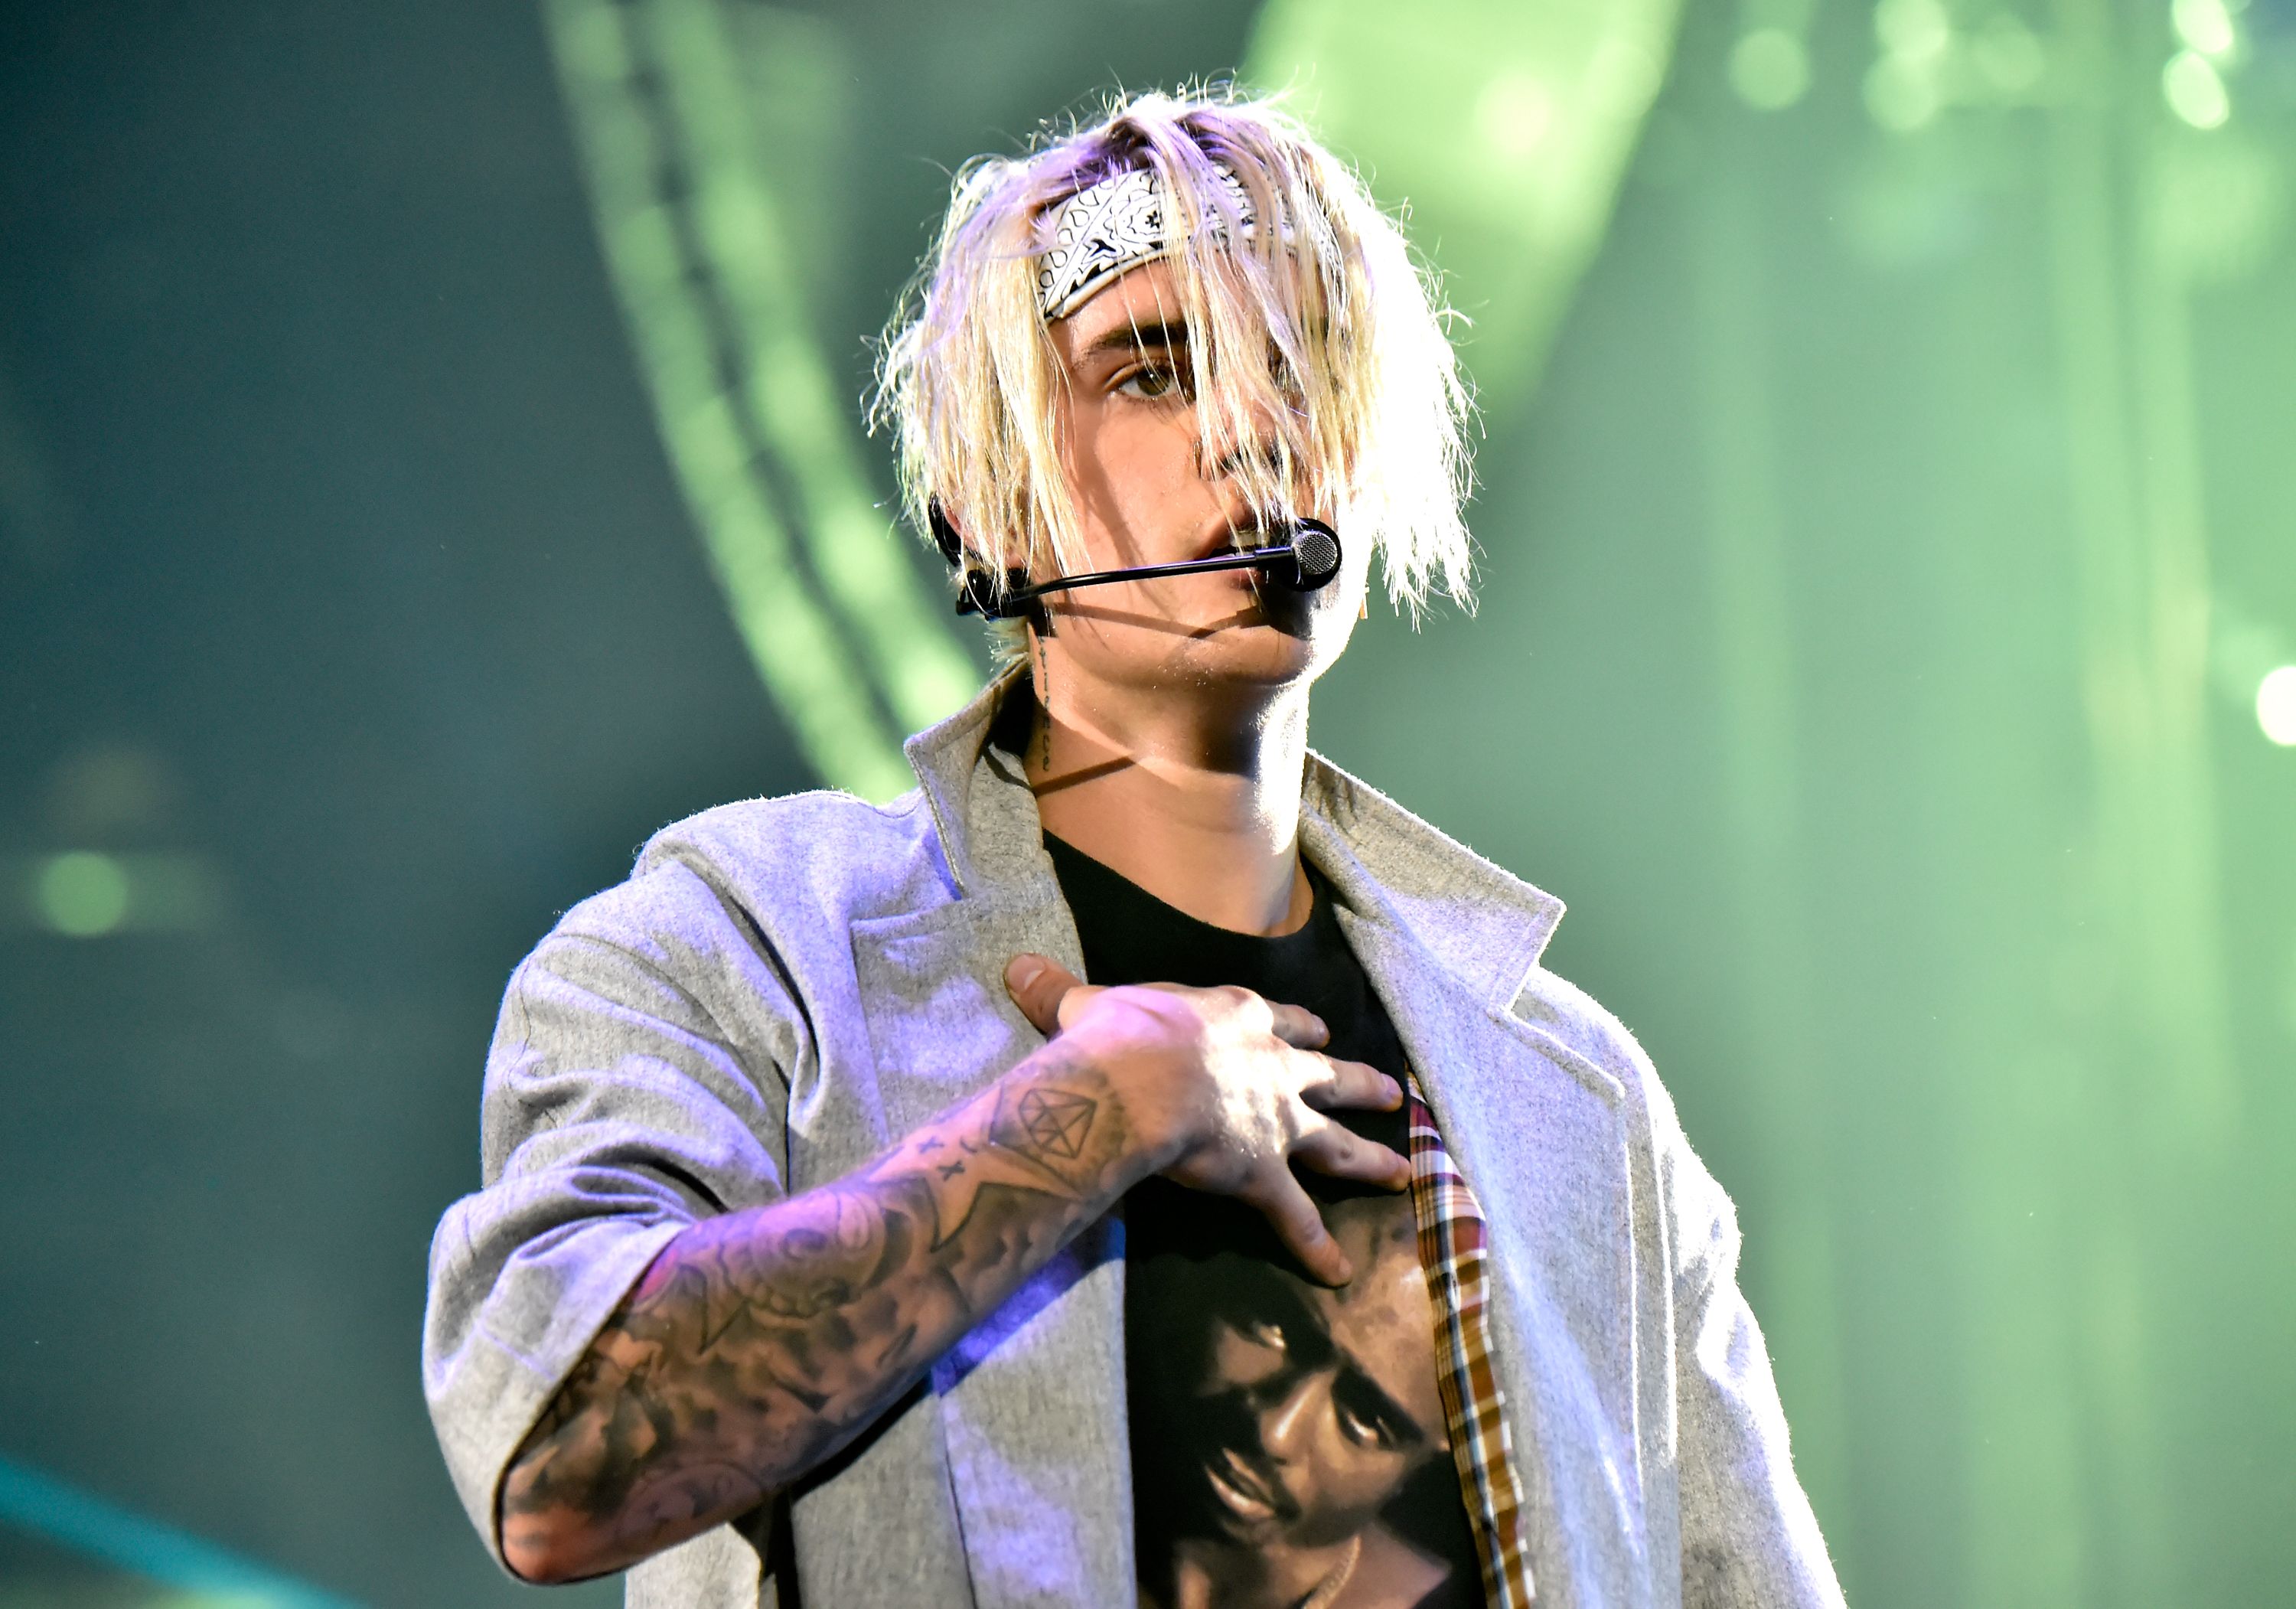 where are ü now in 2023  Justin bieber songs, Songs, Justin bieber